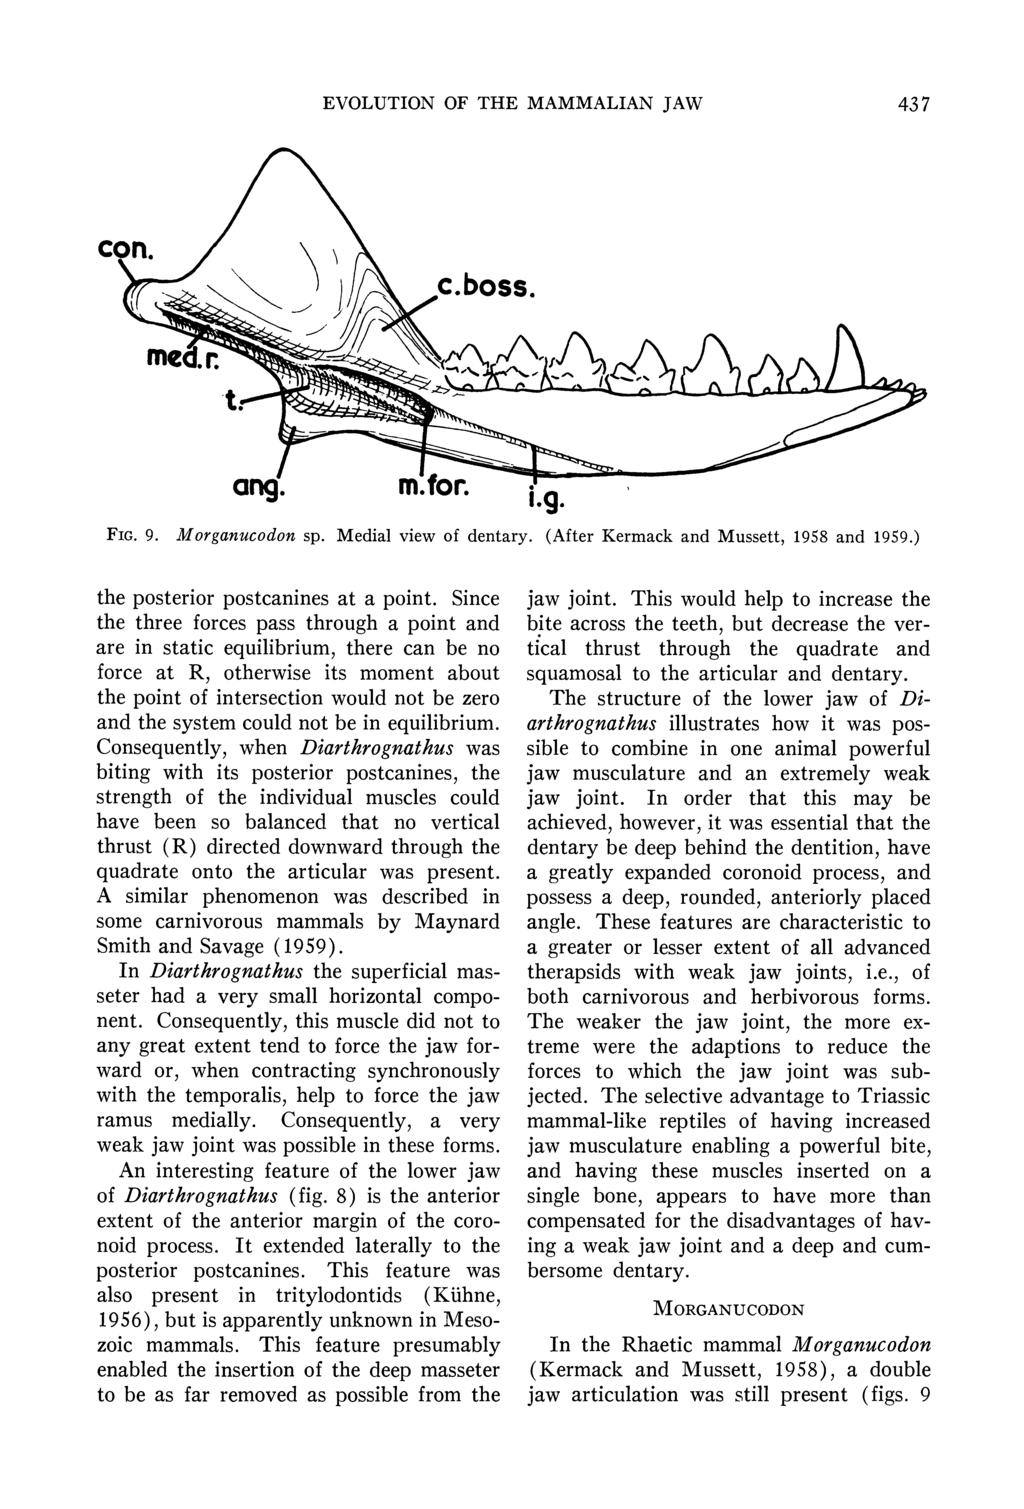 EVOLUTION OF THE MAMMALIAN JAW 437 con. to ang. m.for. i.g FiG. 9. Morganucodon sp. Medial view of dentary. (After Kermack and Mussett, 1958 and 1959.) the posterior postcanines at a point.